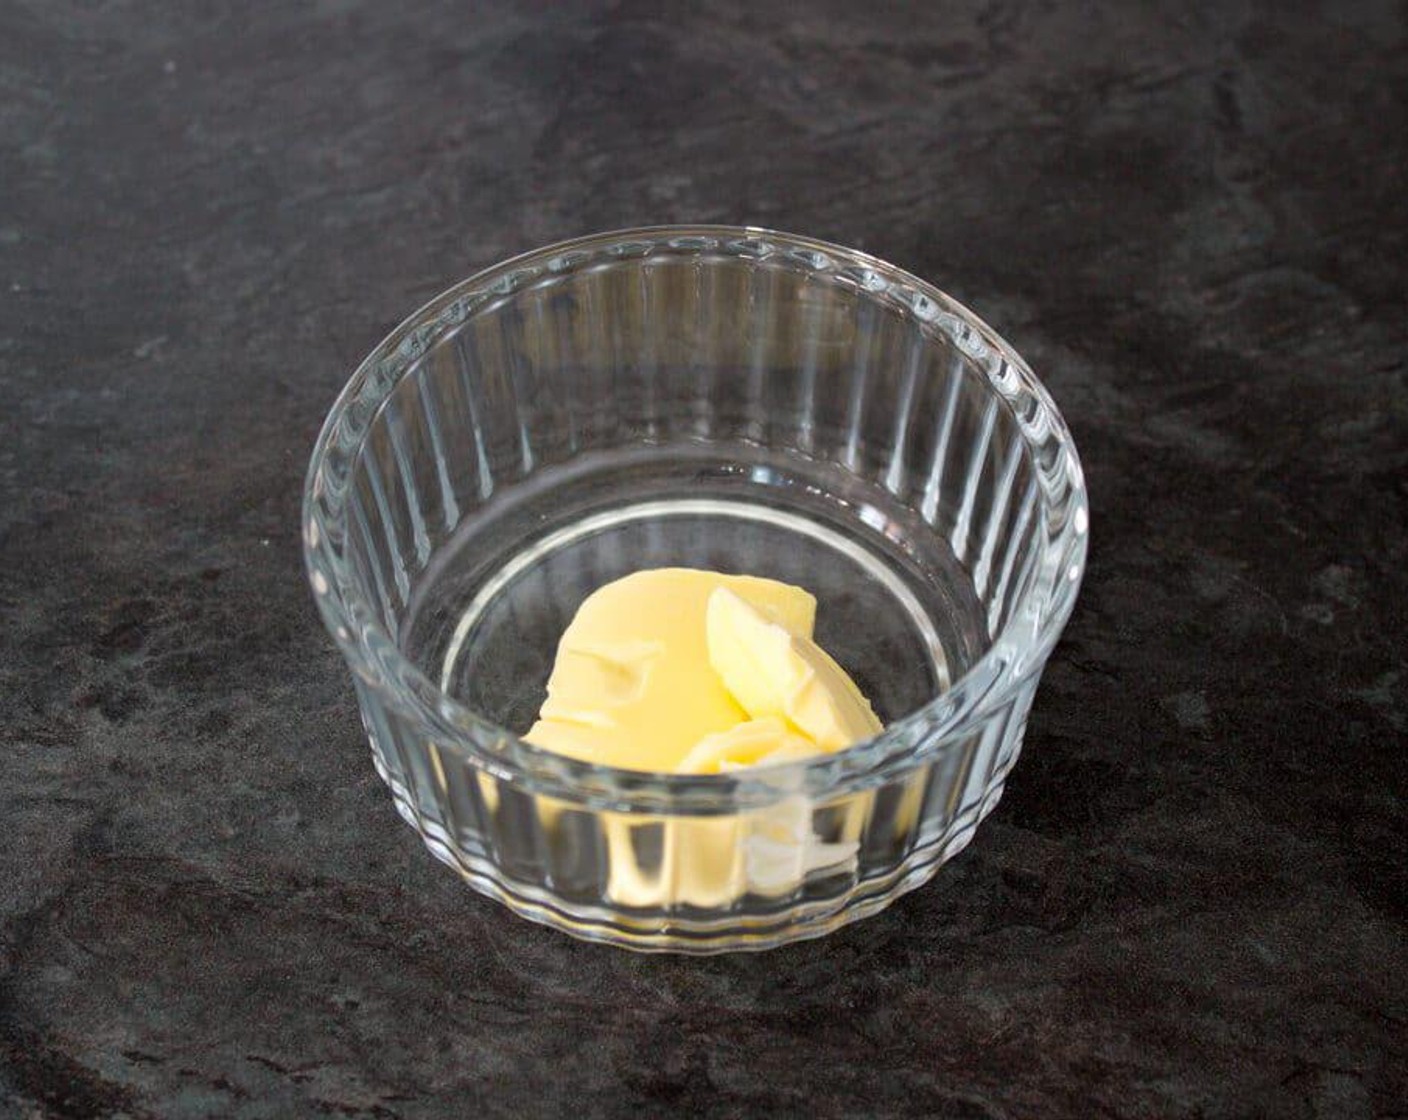 step 2 Add the Butter (1/2 Tbsp) the ramekin, then pop it in the preheating oven to allow it to melt.